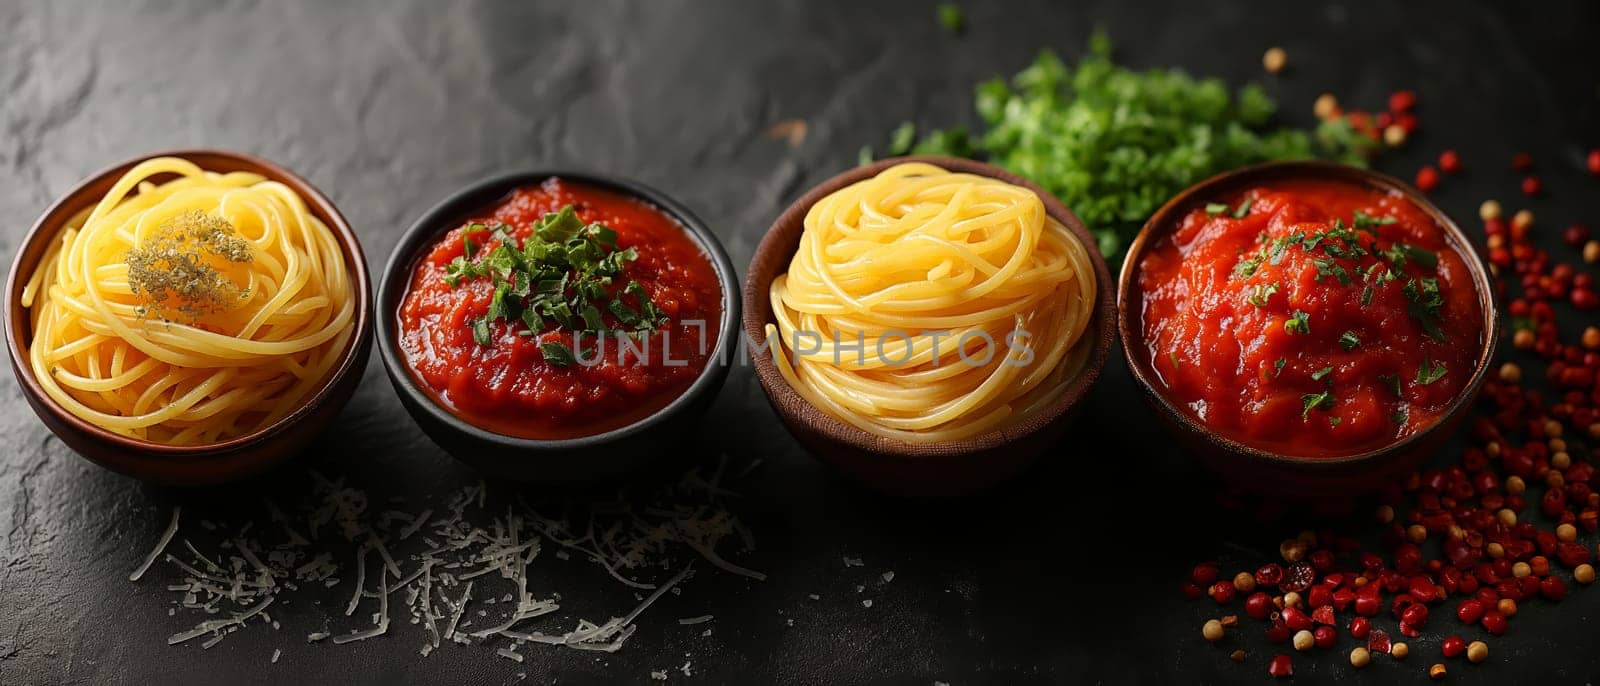 Food background with spaghetti recipe ingredient on black texture background by Fischeron